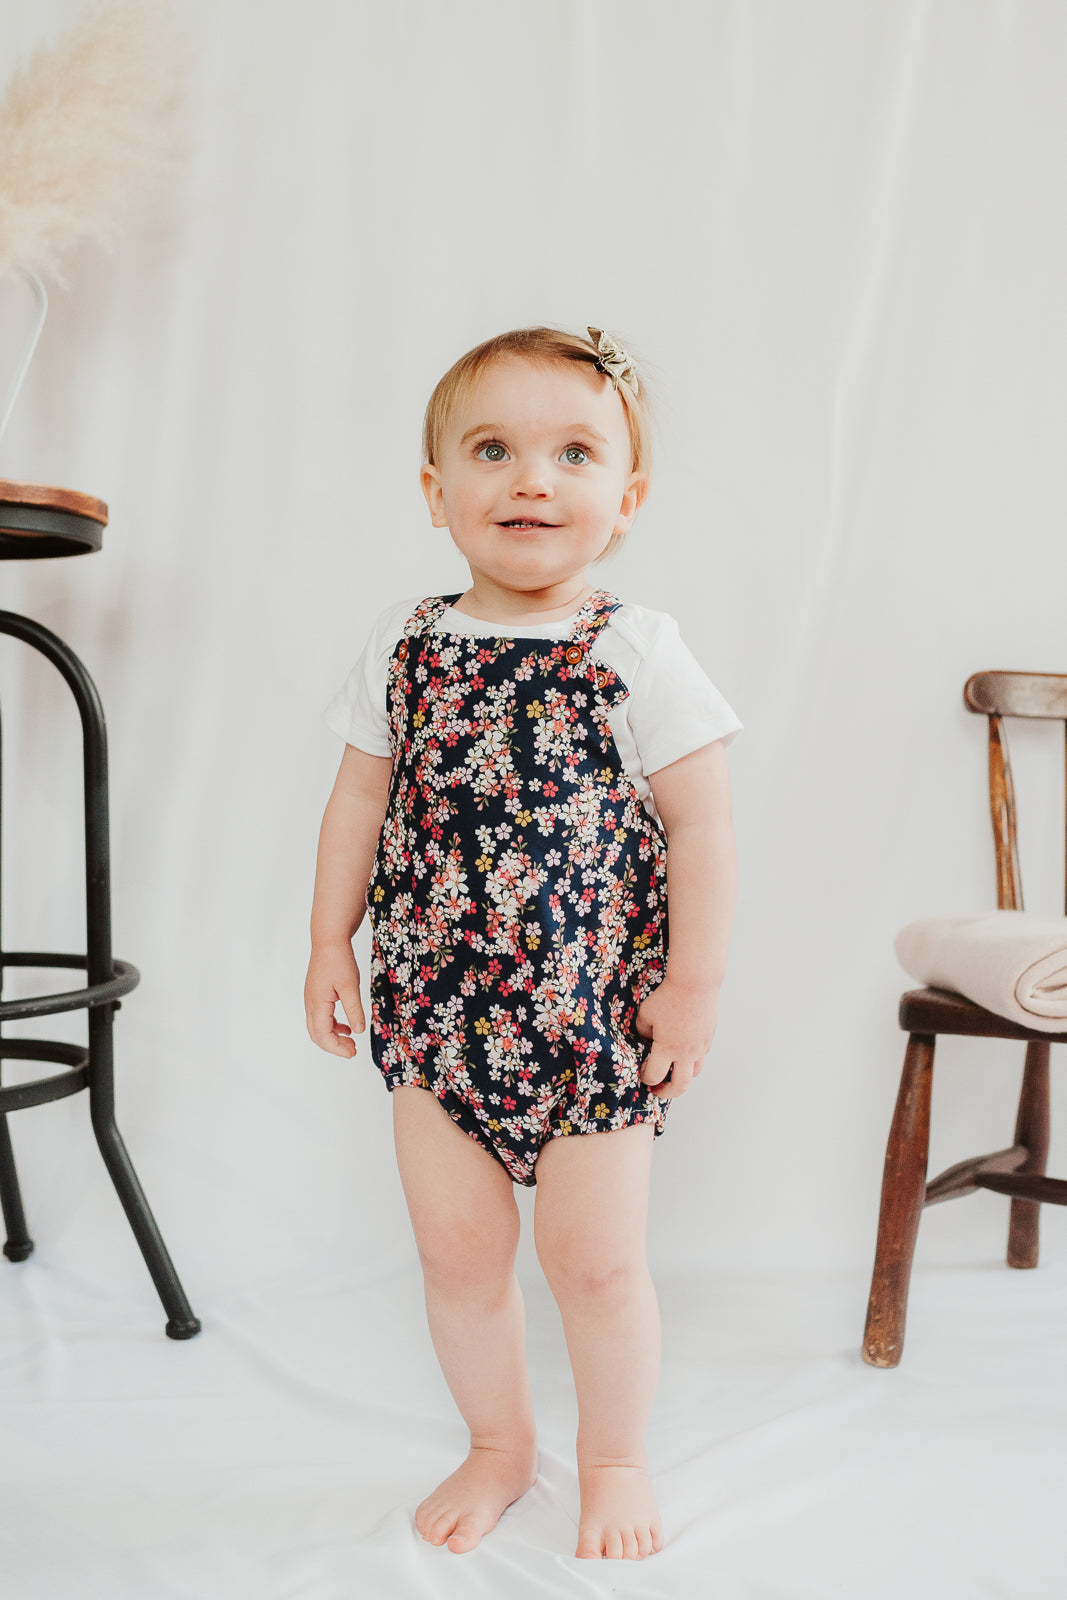 Dungaree Romper 0-3yrs - Navy and Pink Floral